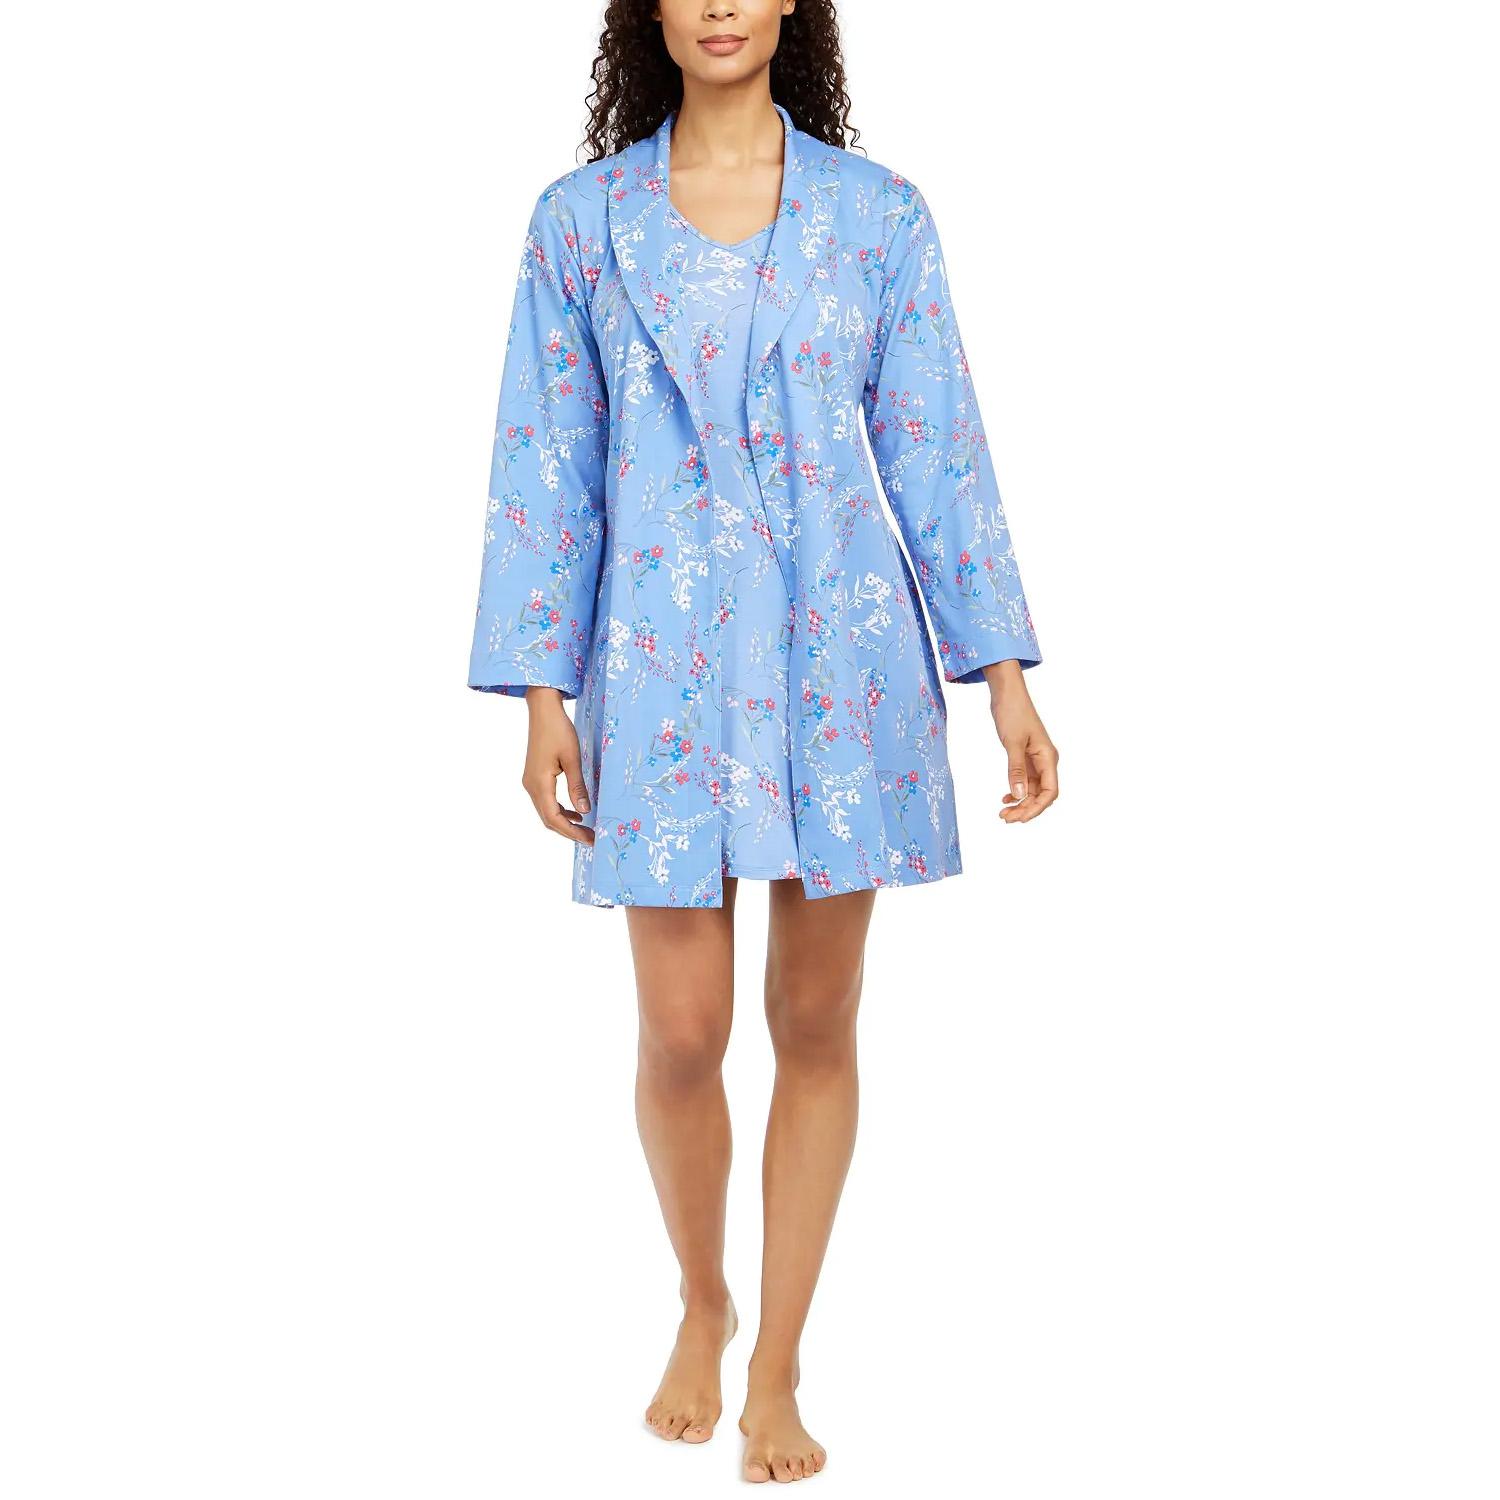 Charter Club Womens Cotton Floral-Print Wrap Robe for $9.96